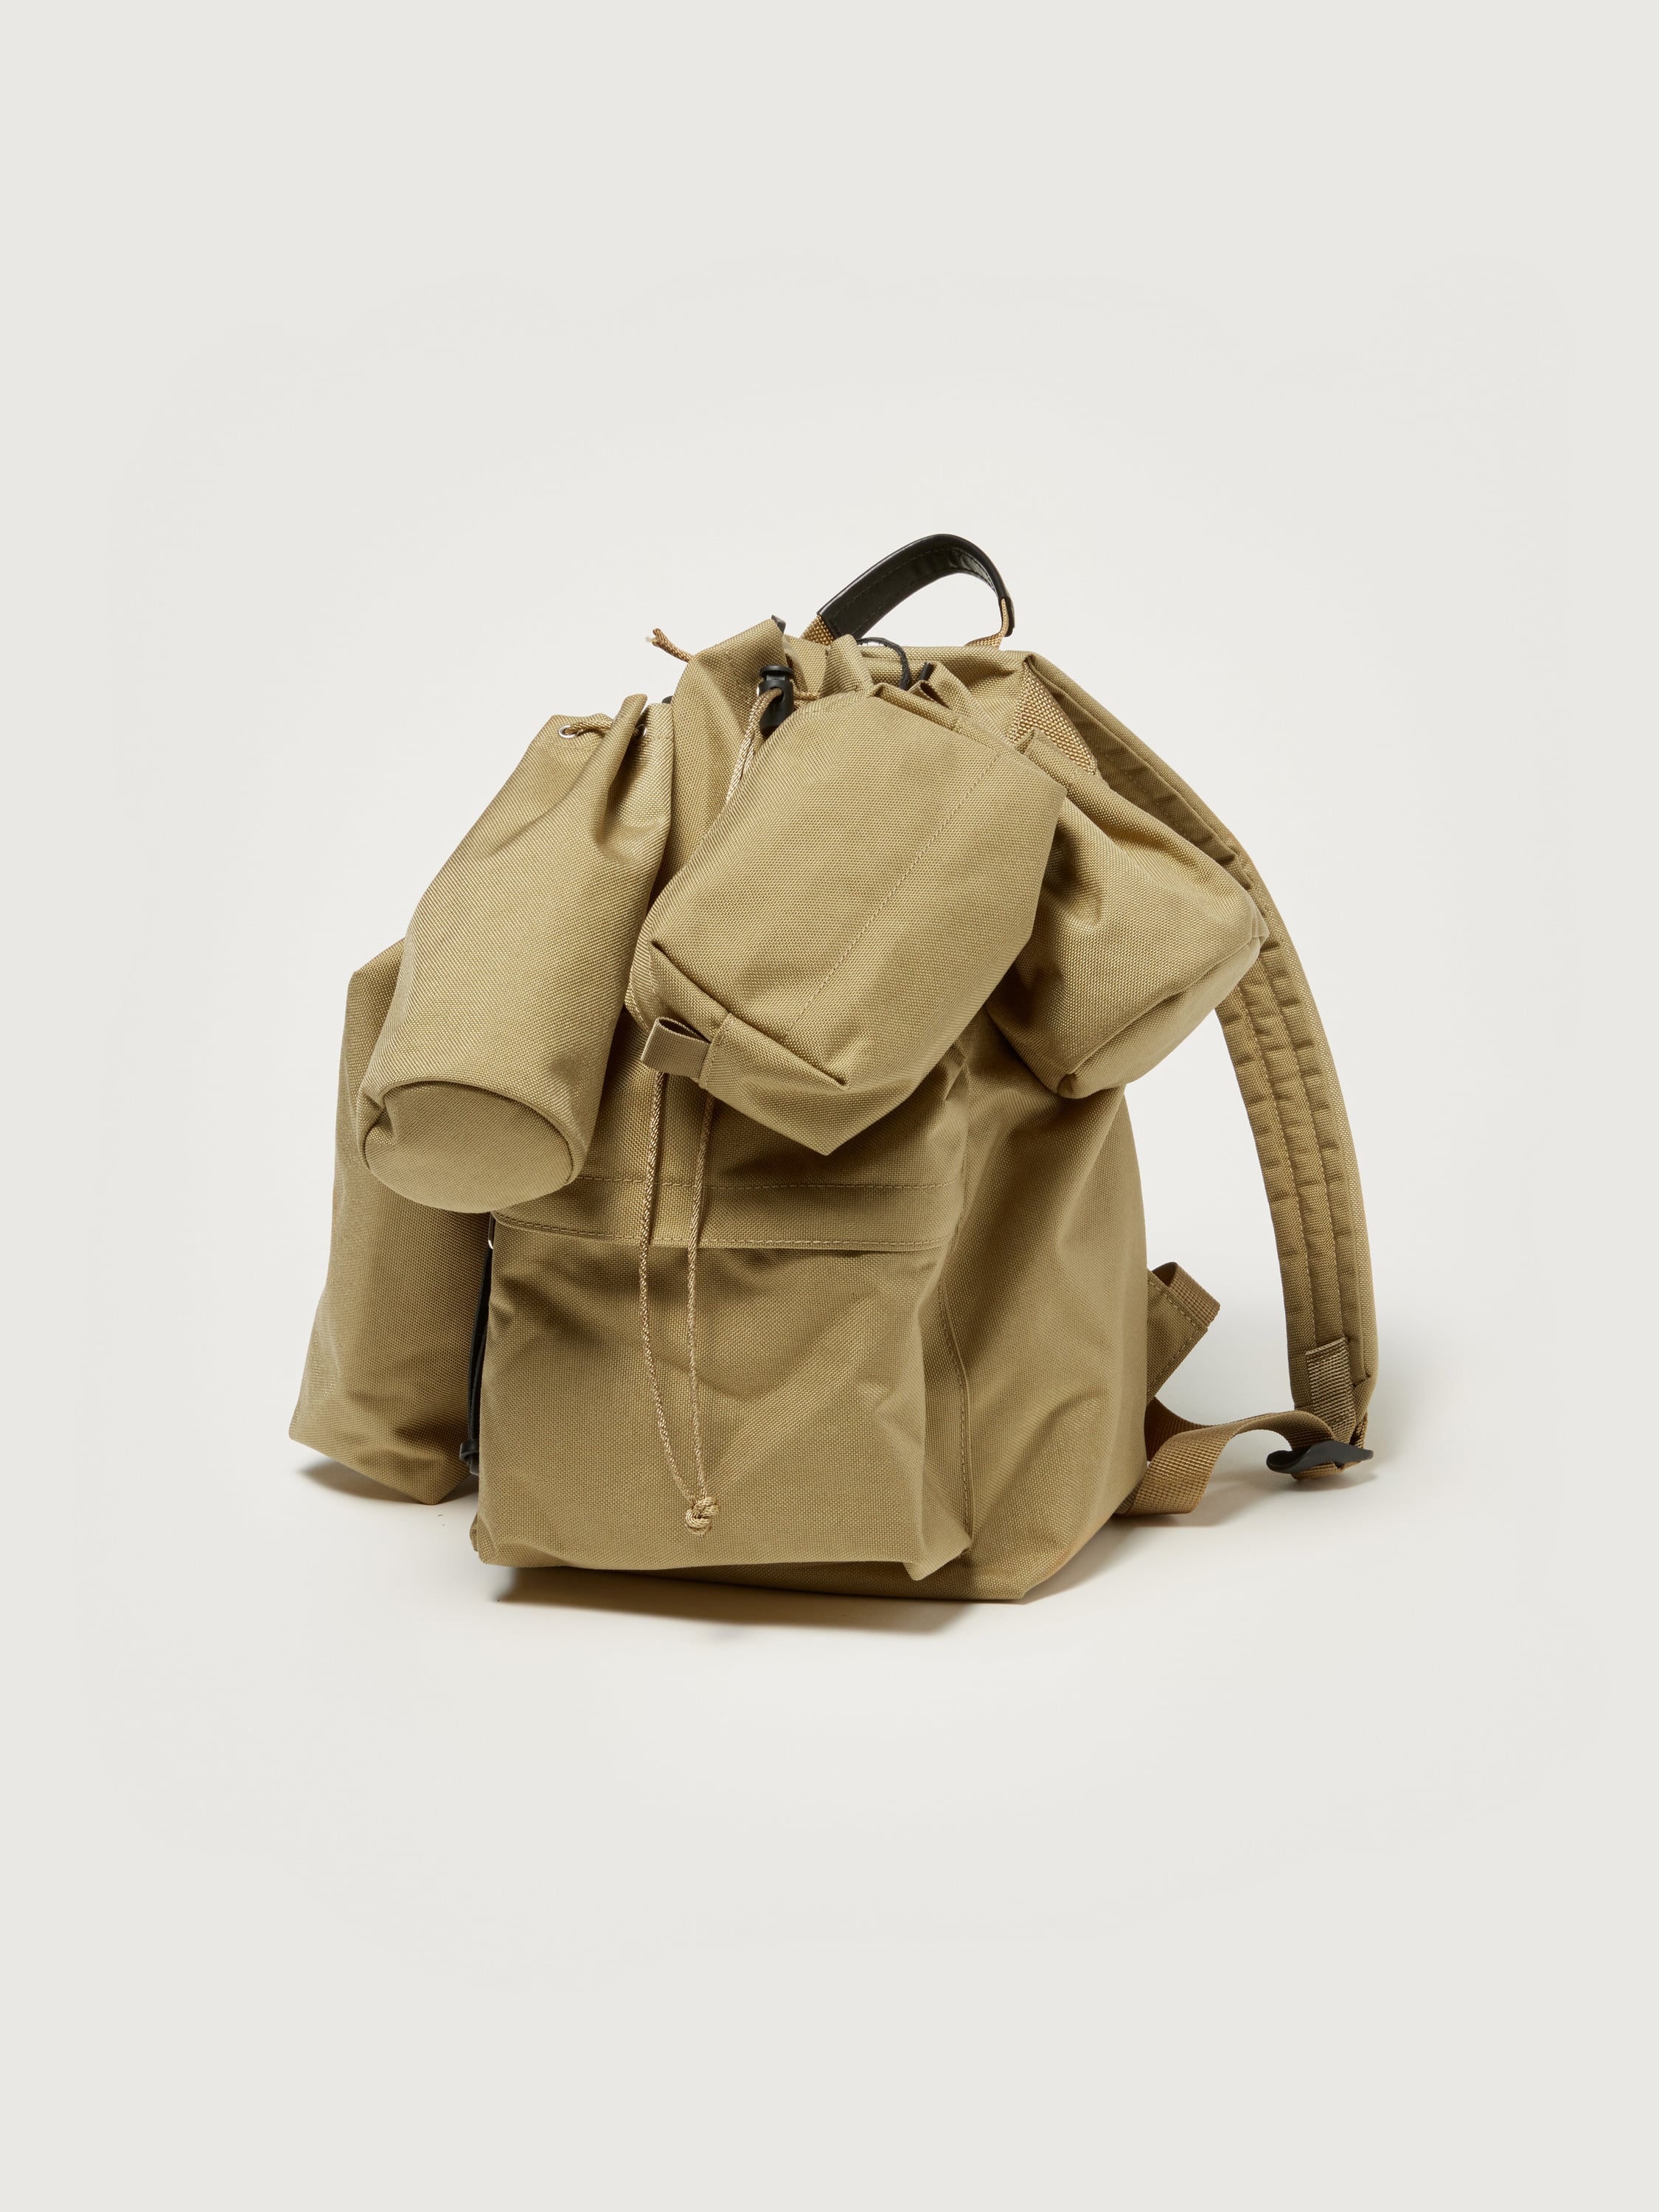 SMALL BACKPACK SET MADE BY AETA 詳細画像 BEIGE 2